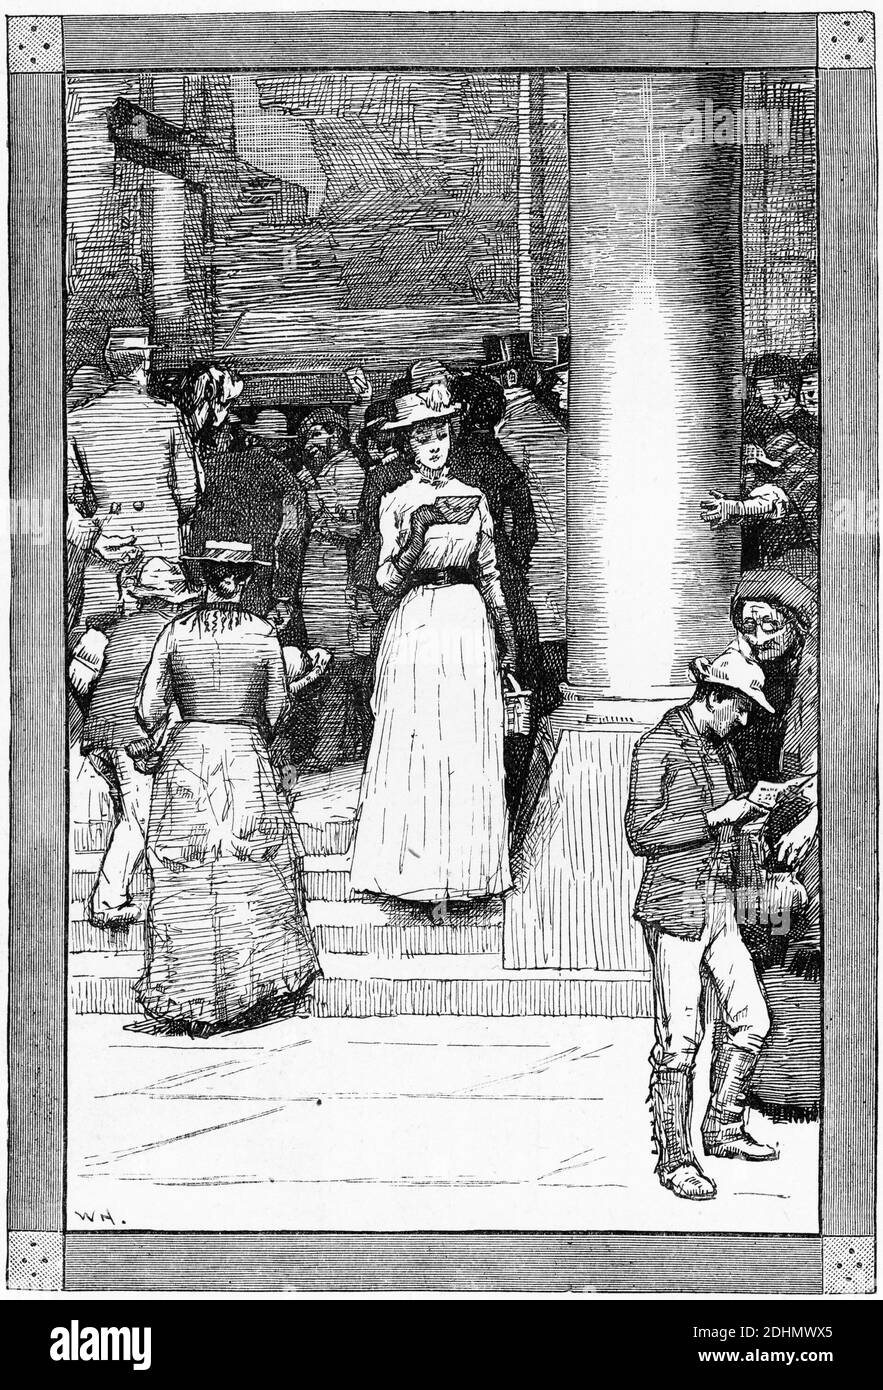 Engraving of the excitement of picking up the English mail from the Sydney Post Office, circa 1880 Stock Photo